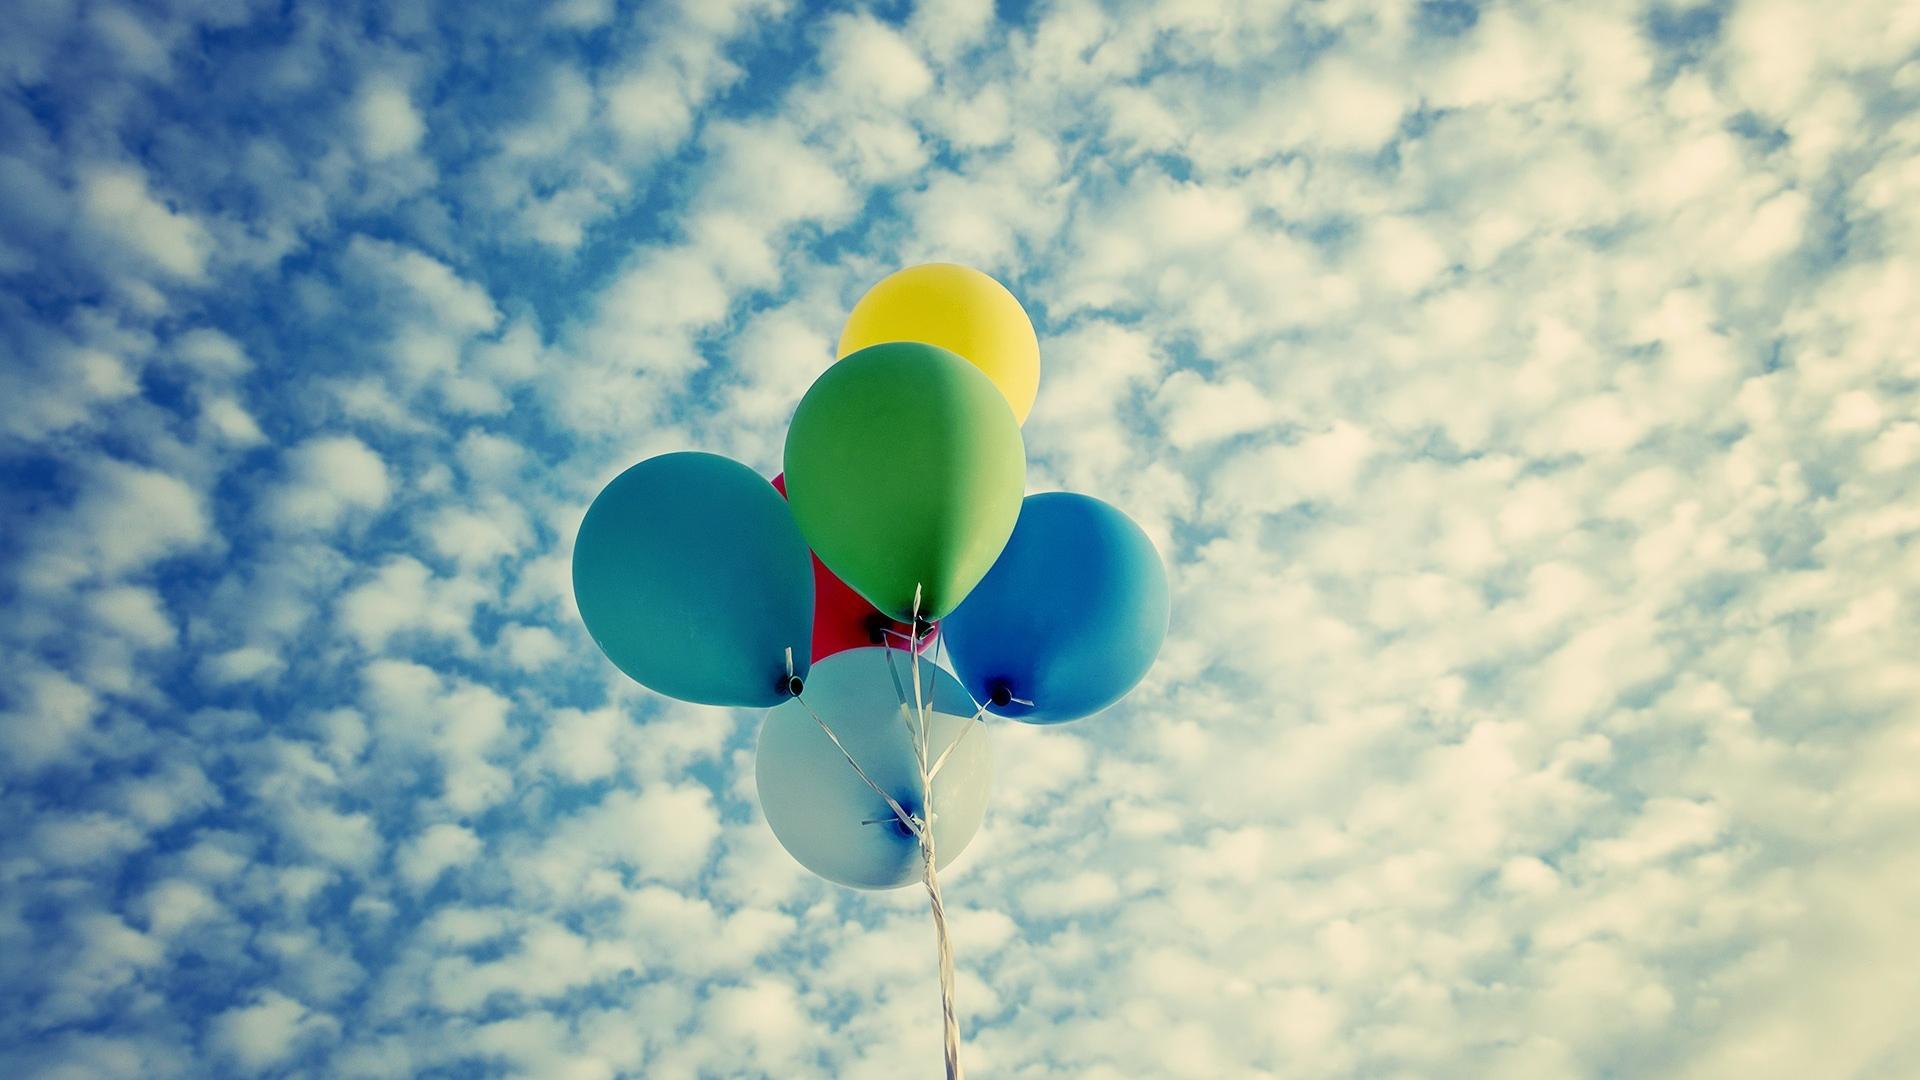 🥇 Clouds balloons skyscapes wallpaper | (112601)